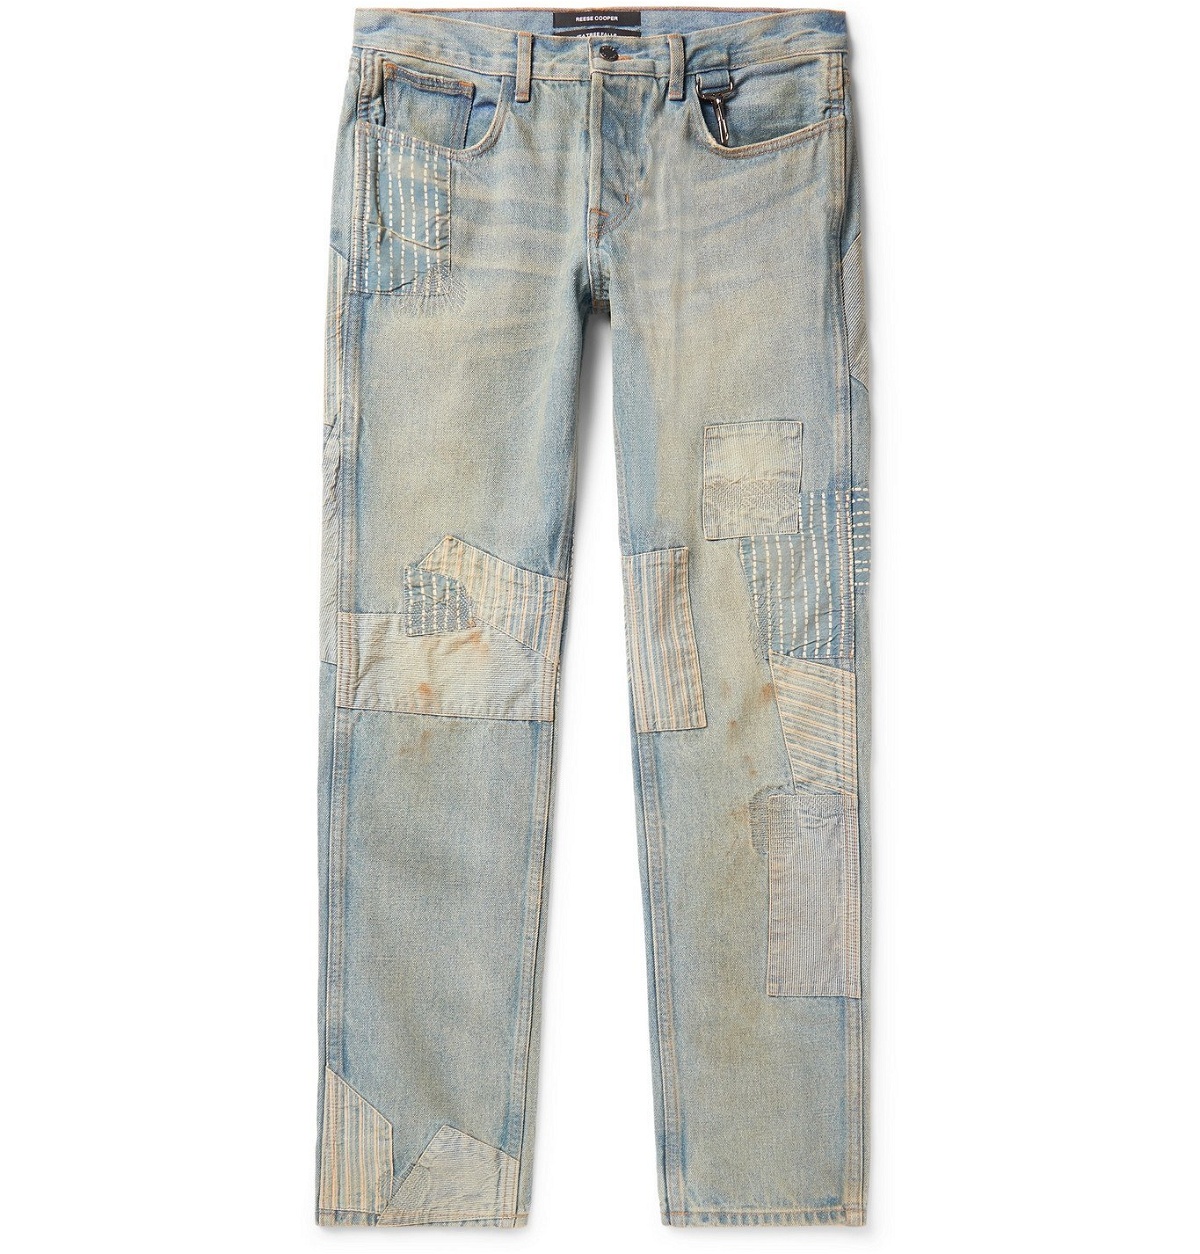 Reese Cooper® - Distressed Patchwork Denim Jeans - Blue Reese Cooper